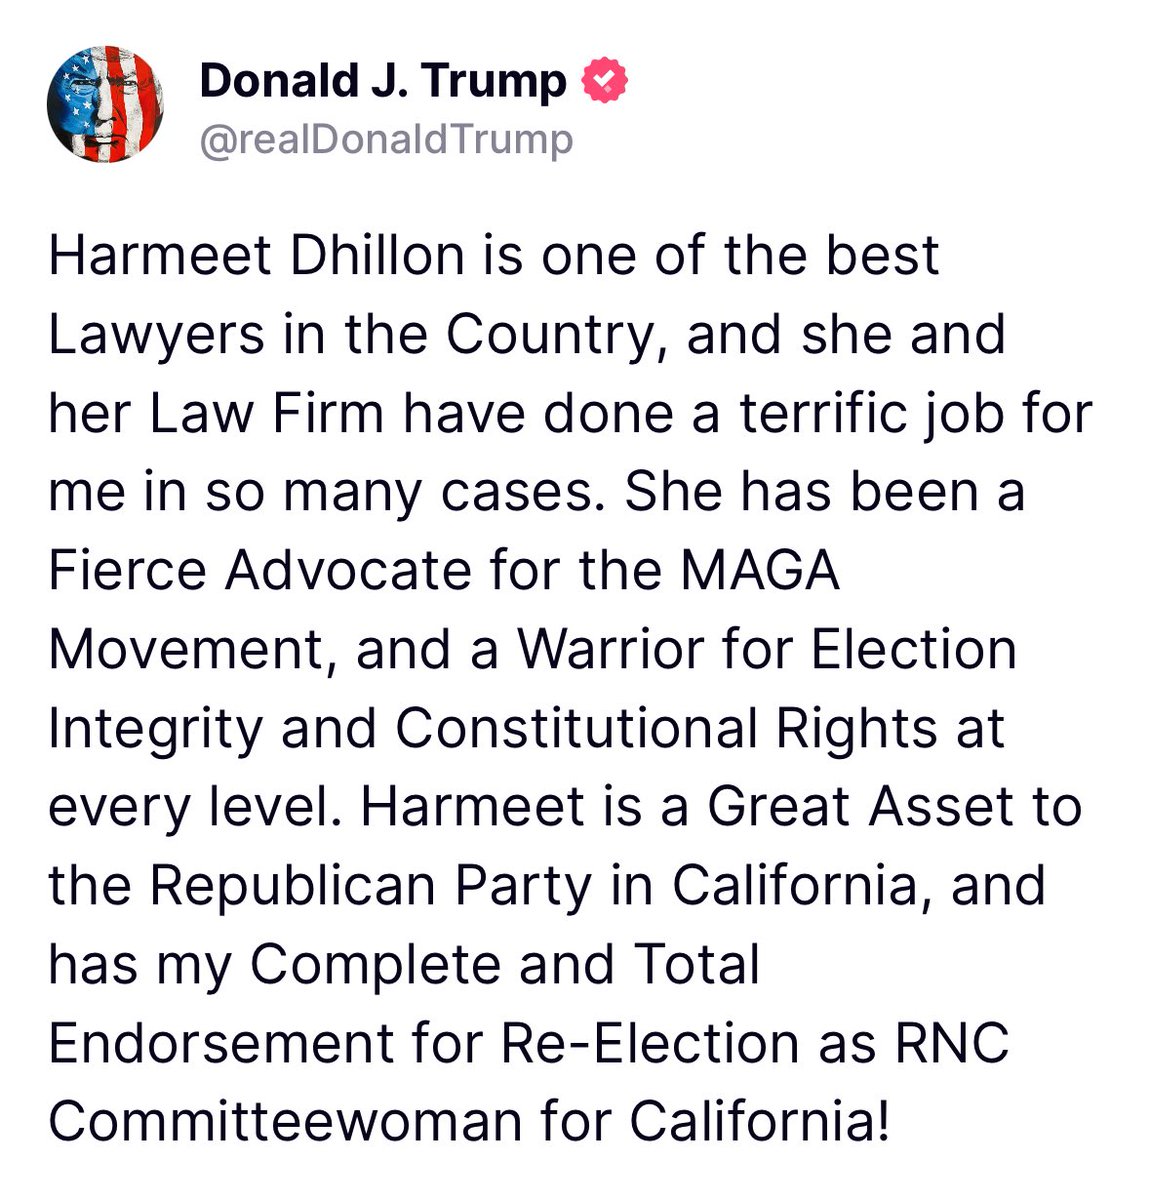 This just in! Thank you ⁦@realDonaldTrump⁩ for your huge endorsement!! I will never stop fighting for the values we hold dear! #MAGA !